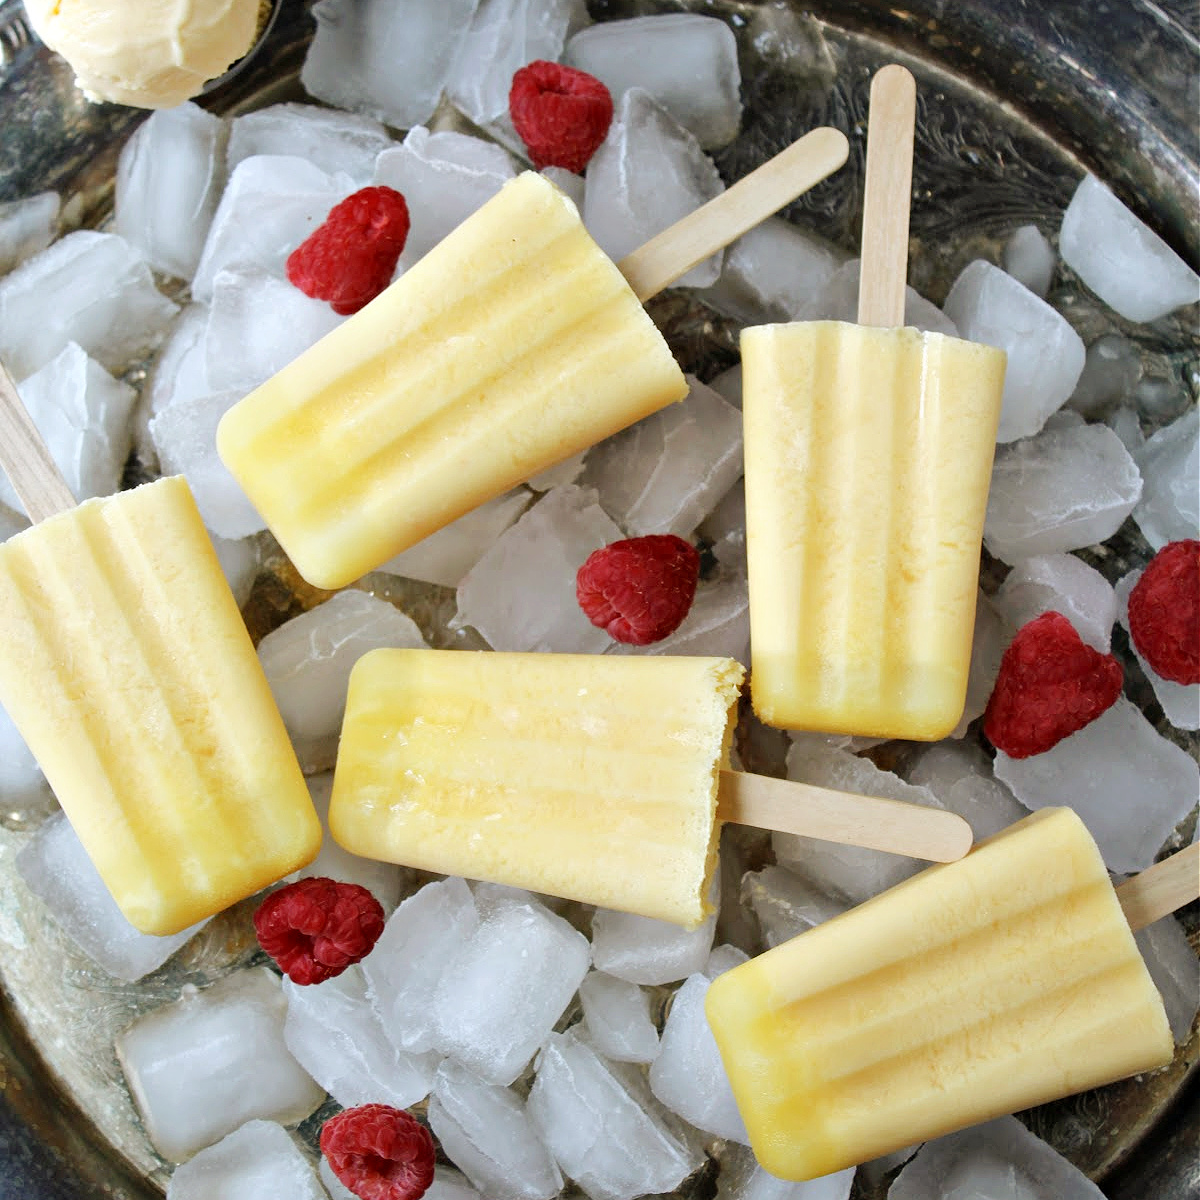 Orange creamsicle popsicles on a platter.